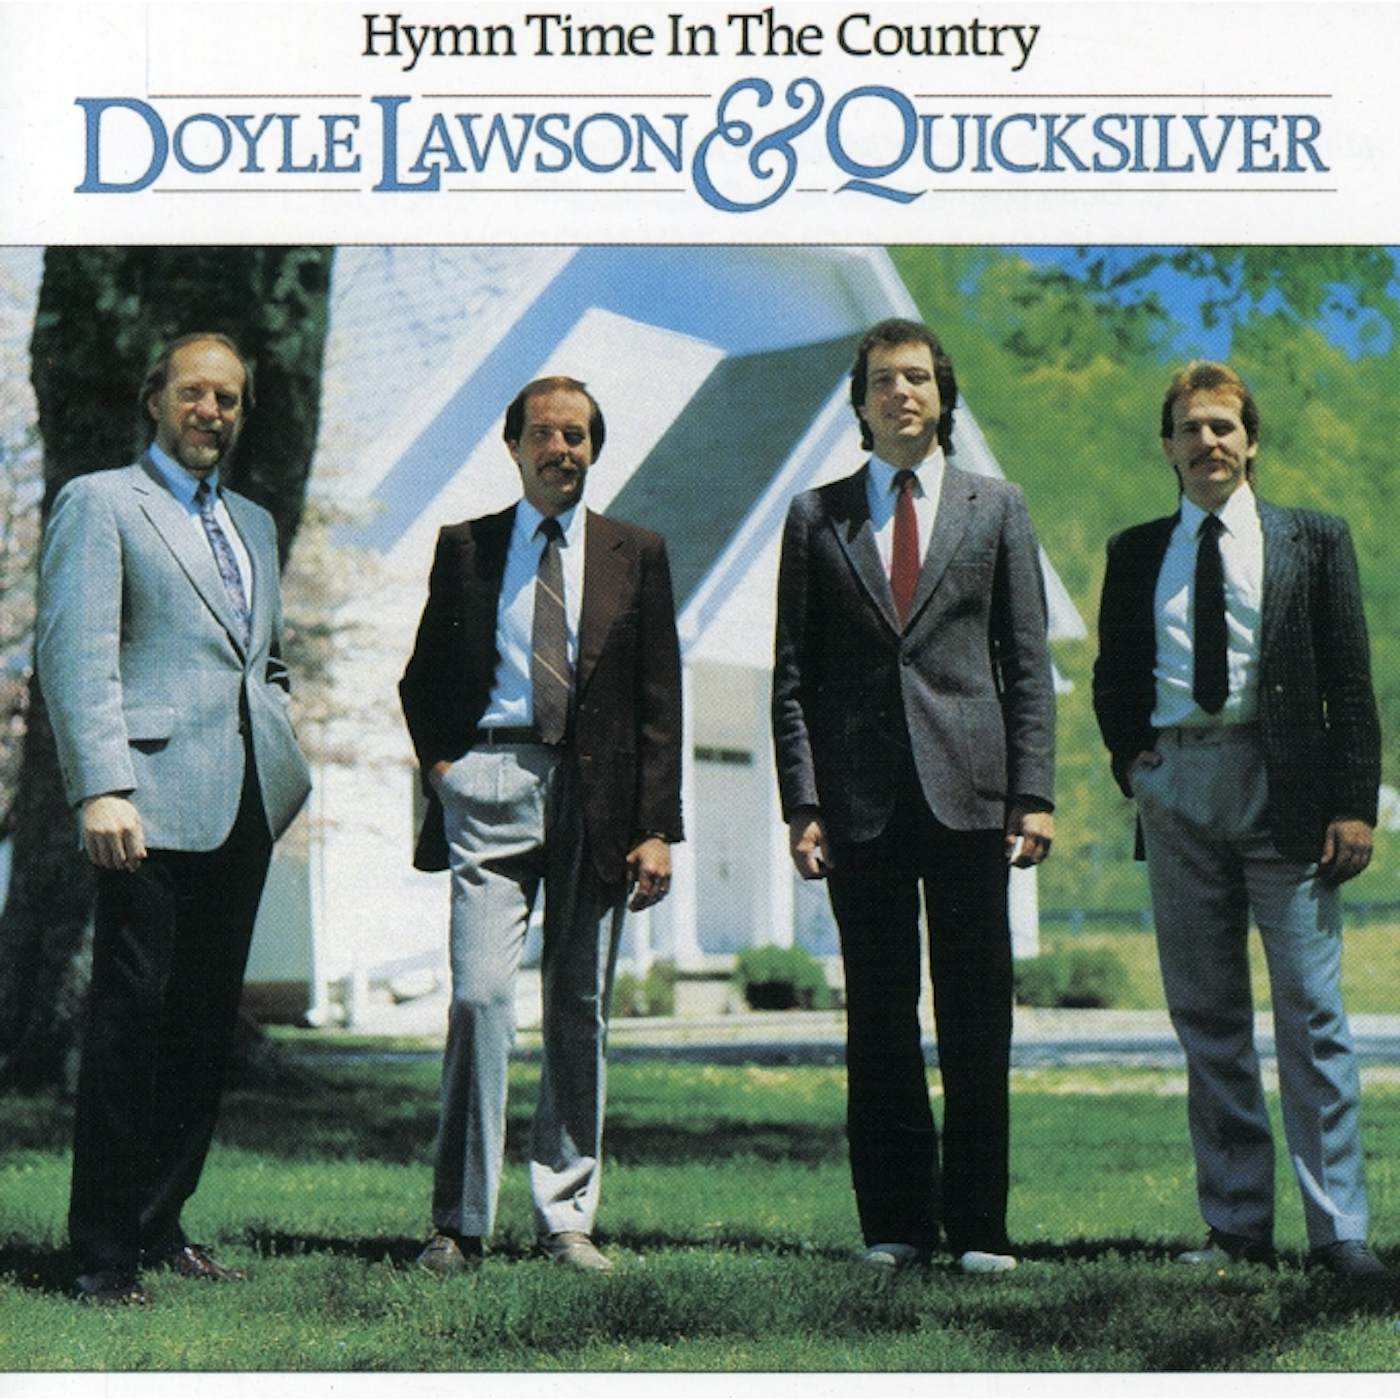 Doyle Lawson & Quicksilver HYMN TIME IN THE COUNTRY CD